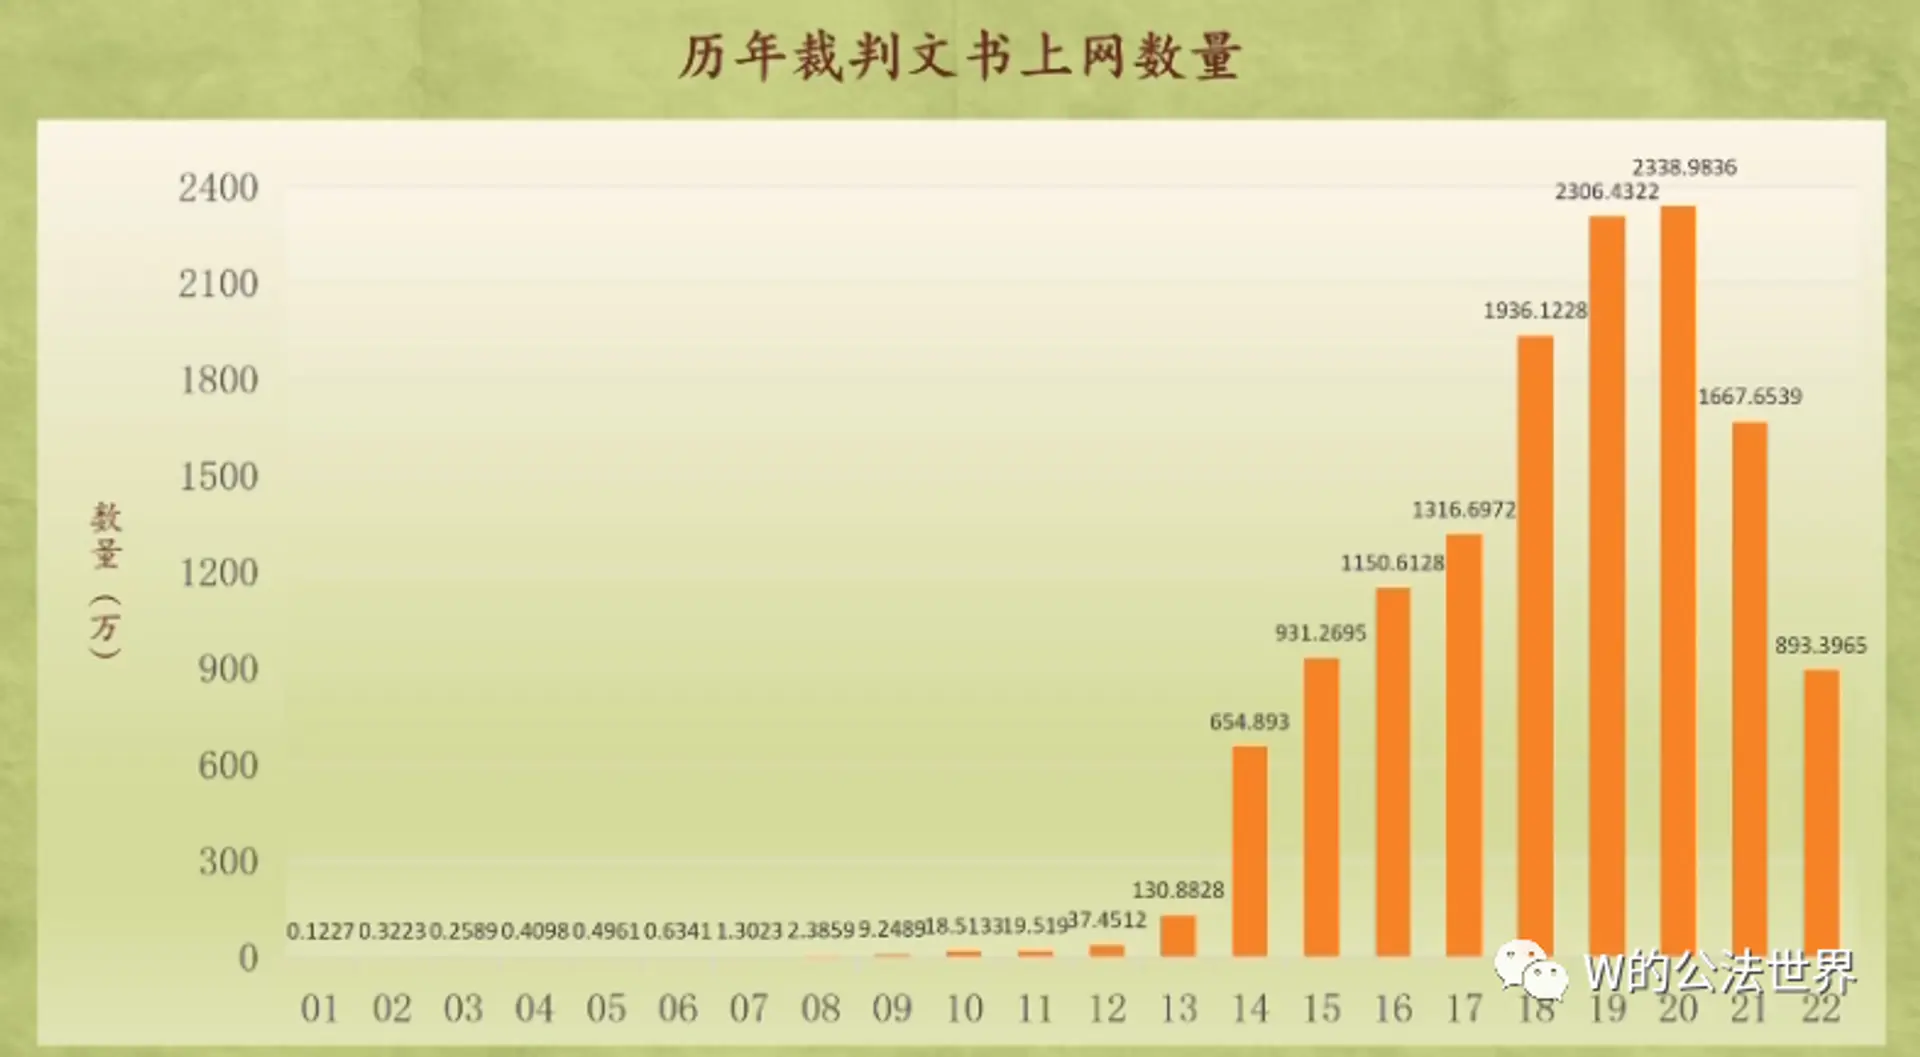 Number of judicial documents published online over the years